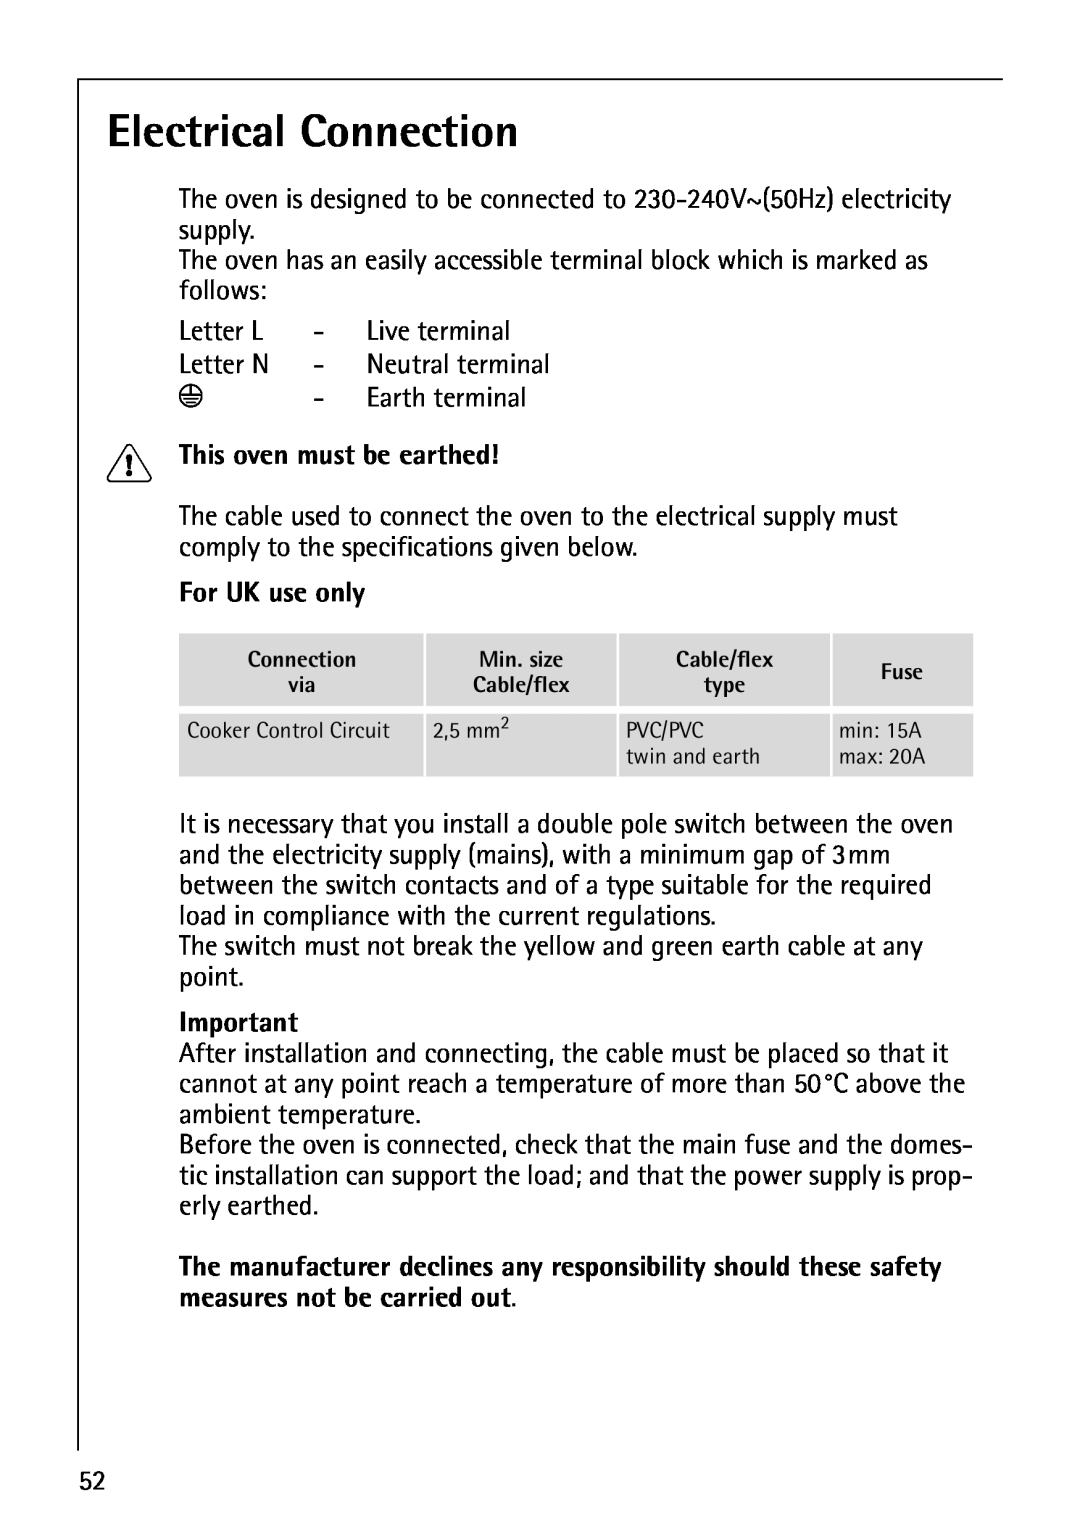 Electrolux B5741-4 manual Electrical Connection, This oven must be earthed, For UK use only 